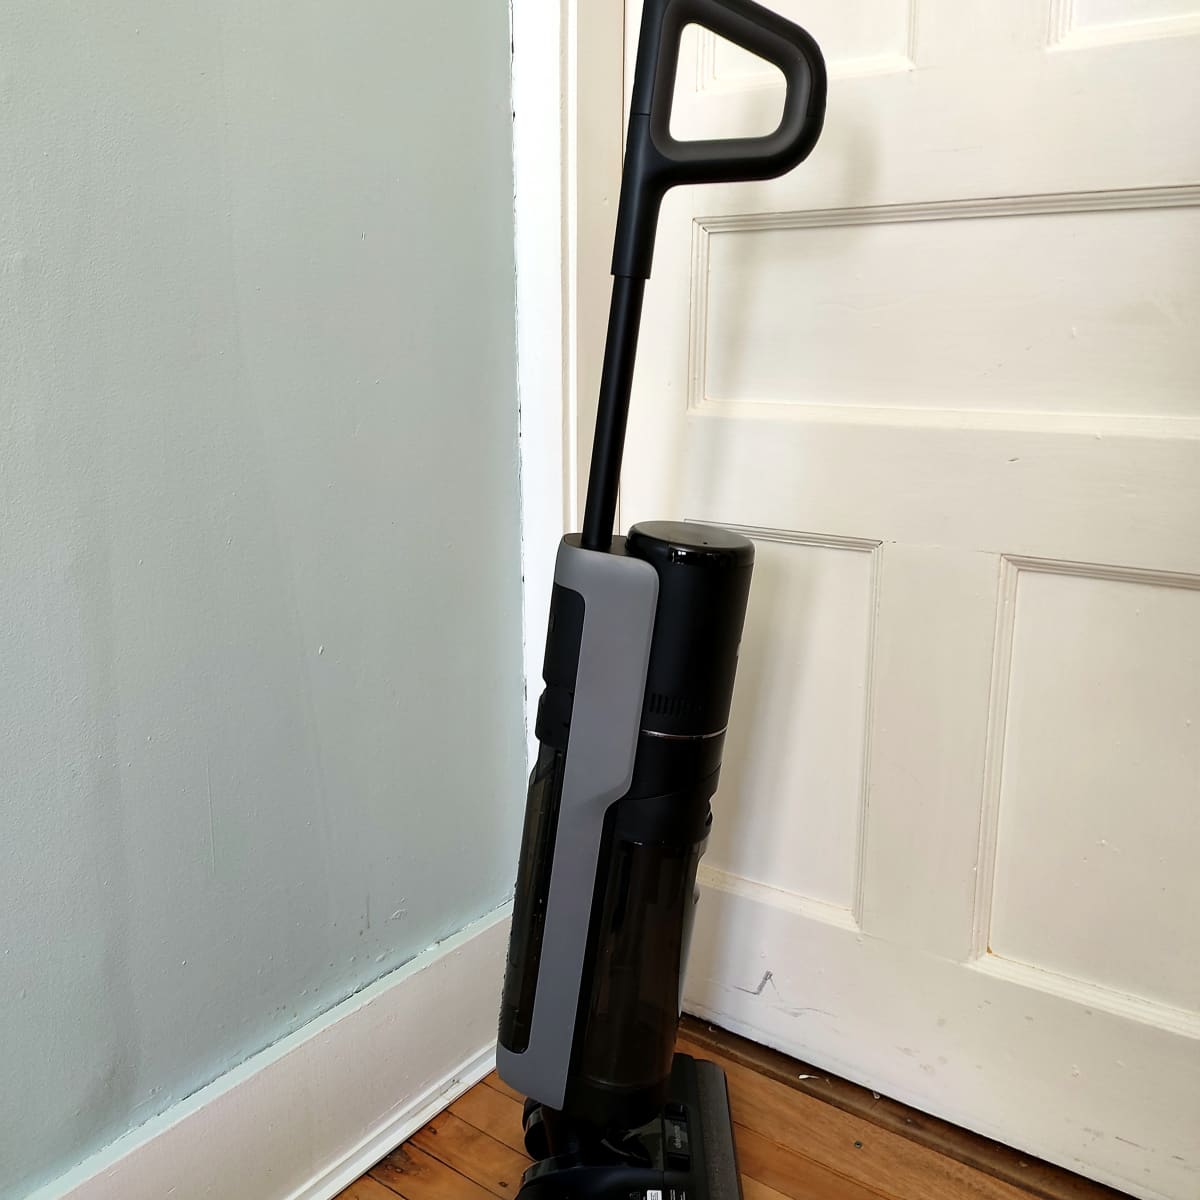 Dreame H12 Pro Wet Dry Vacuum Review - So Close to Perfect! 